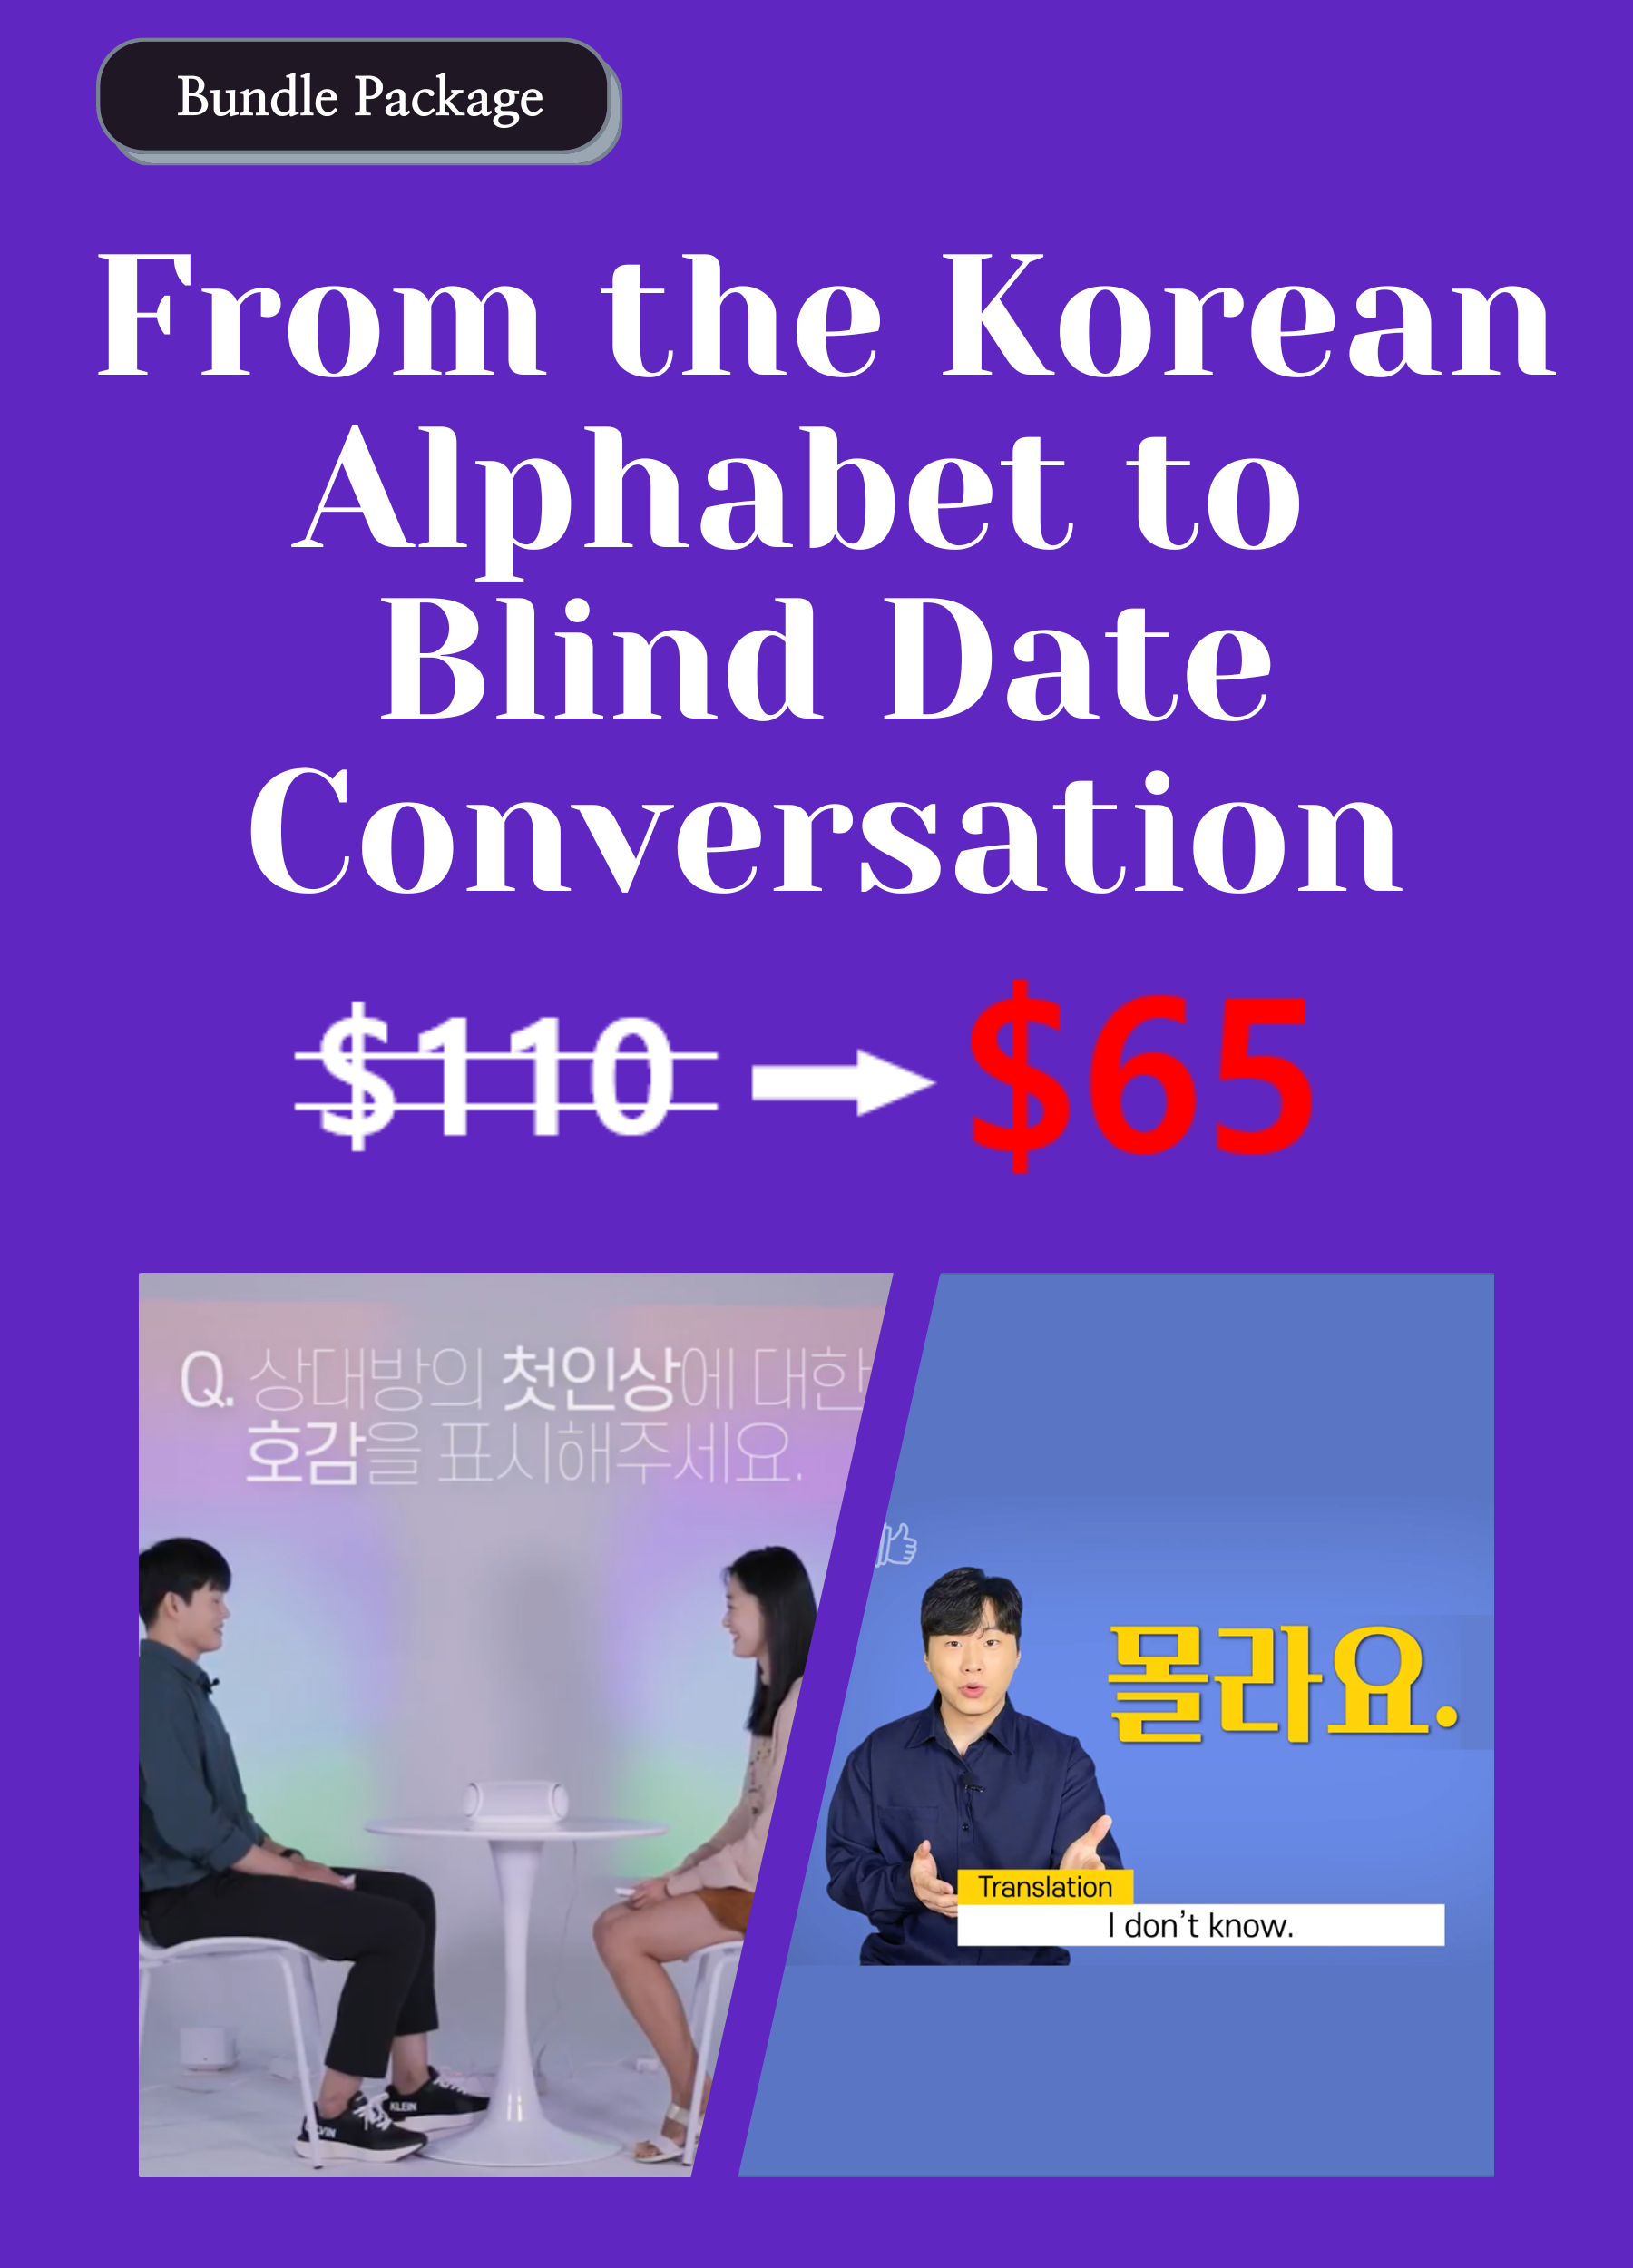 Learning Korean with blind date video.